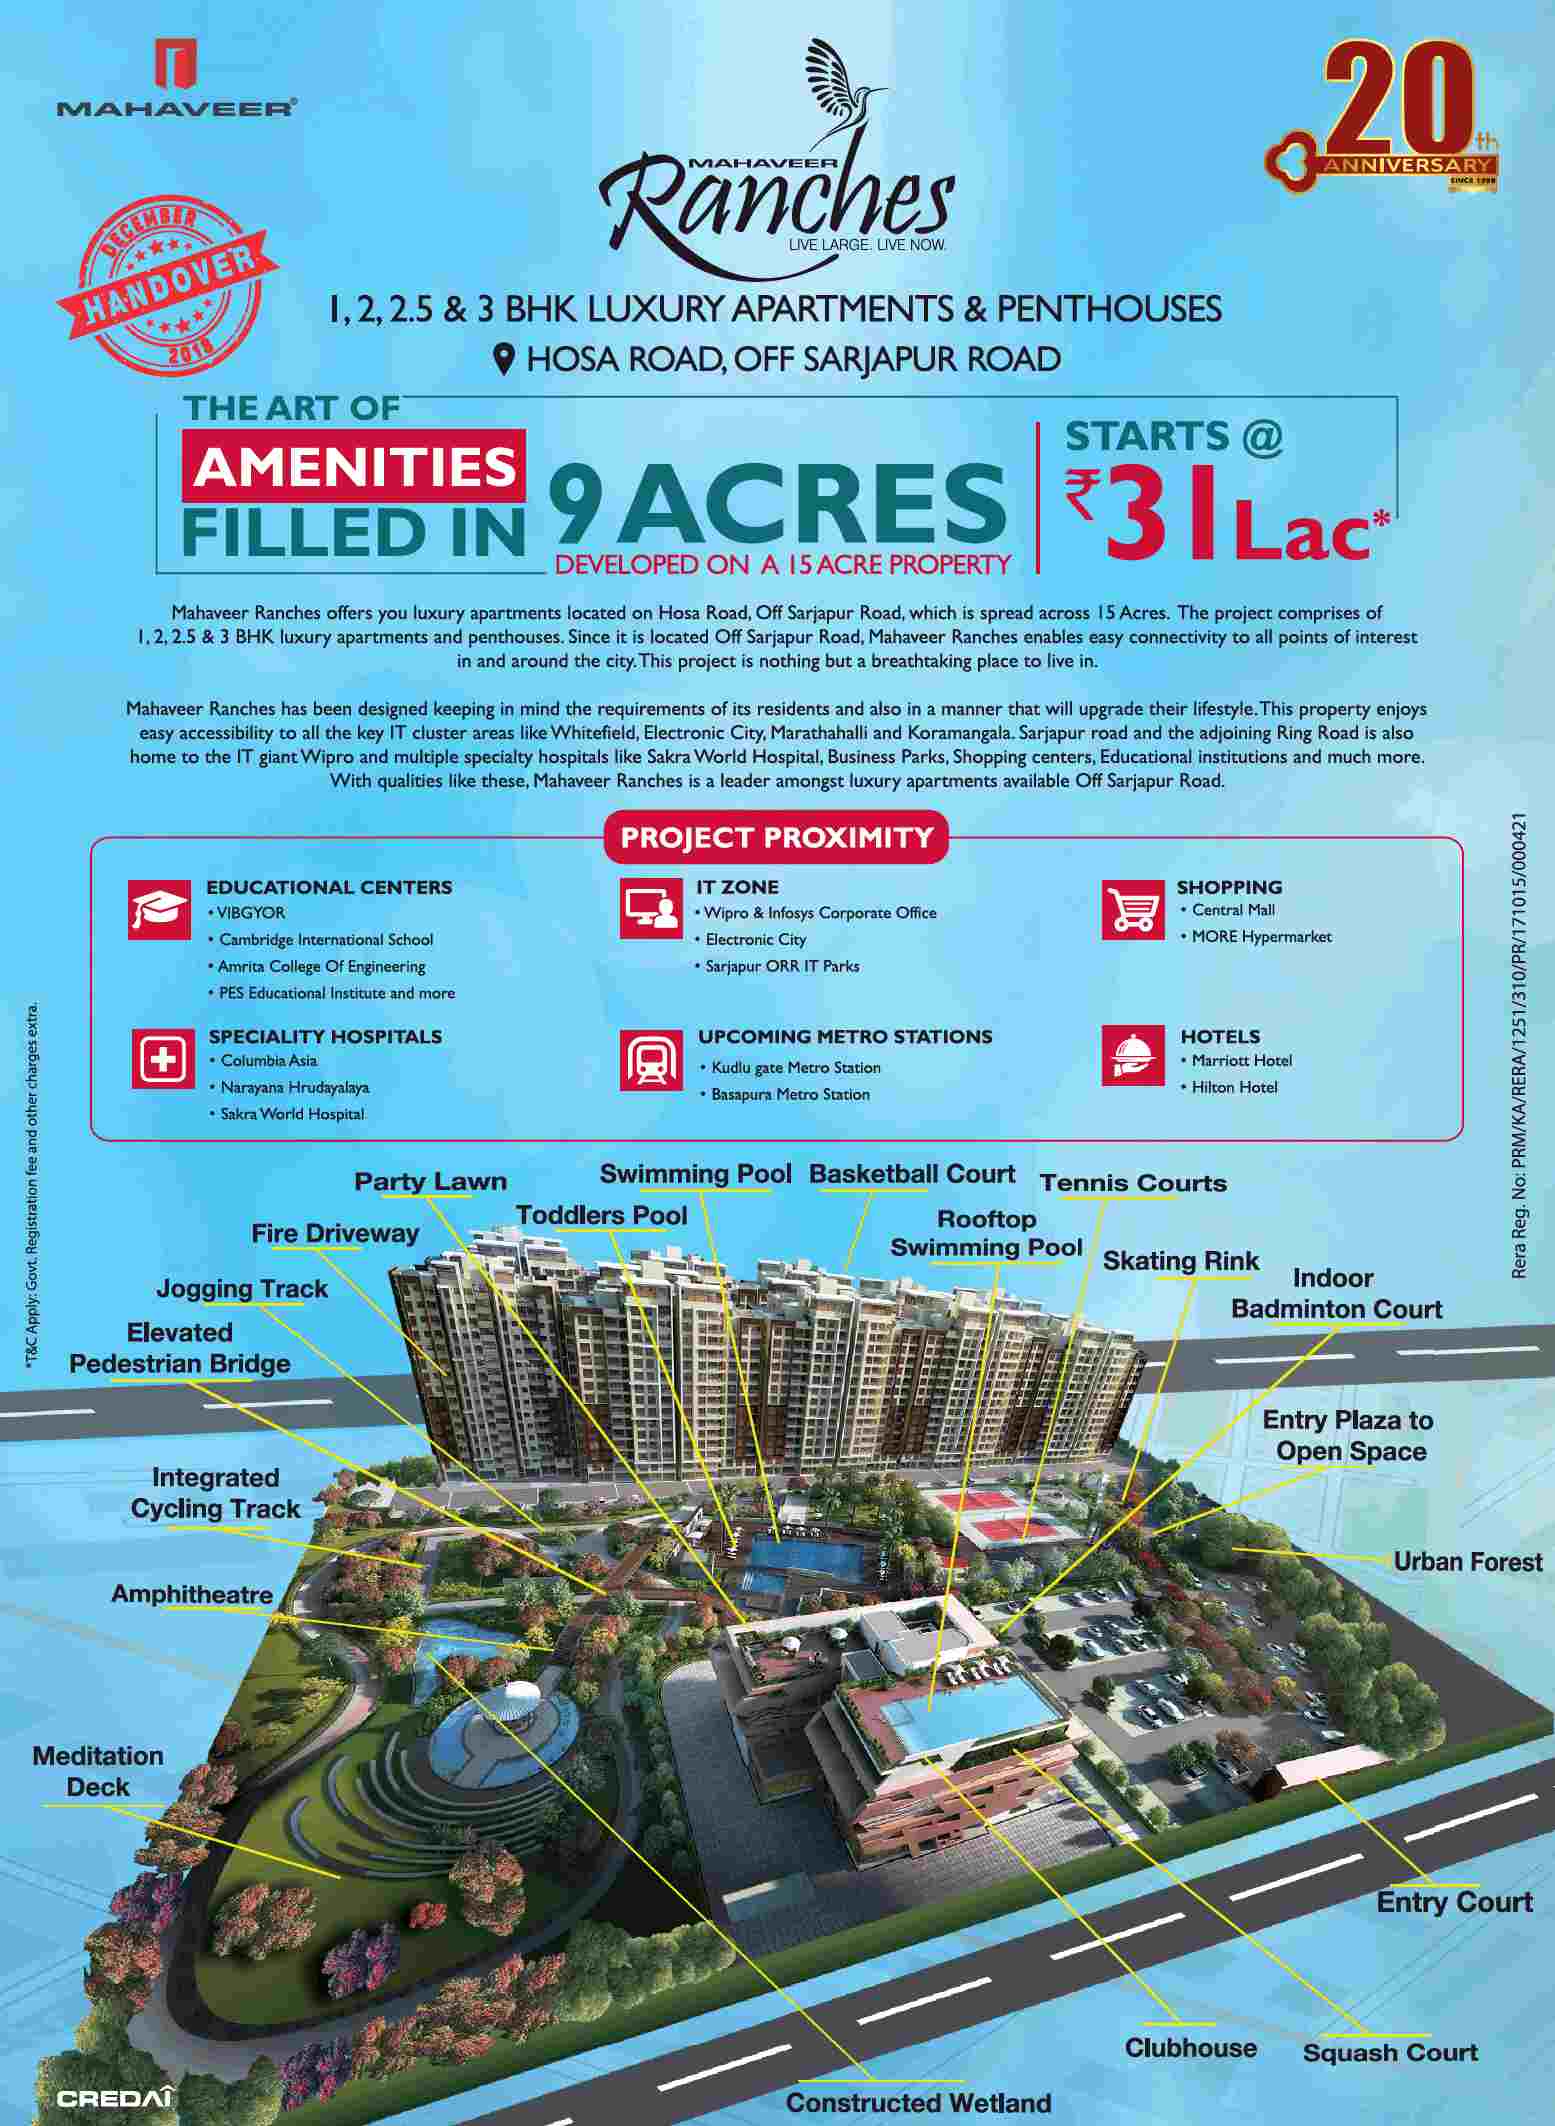 Enjoy the art of amenities filled in 9 acres at Mahaveer Ranches in Bangalore Update